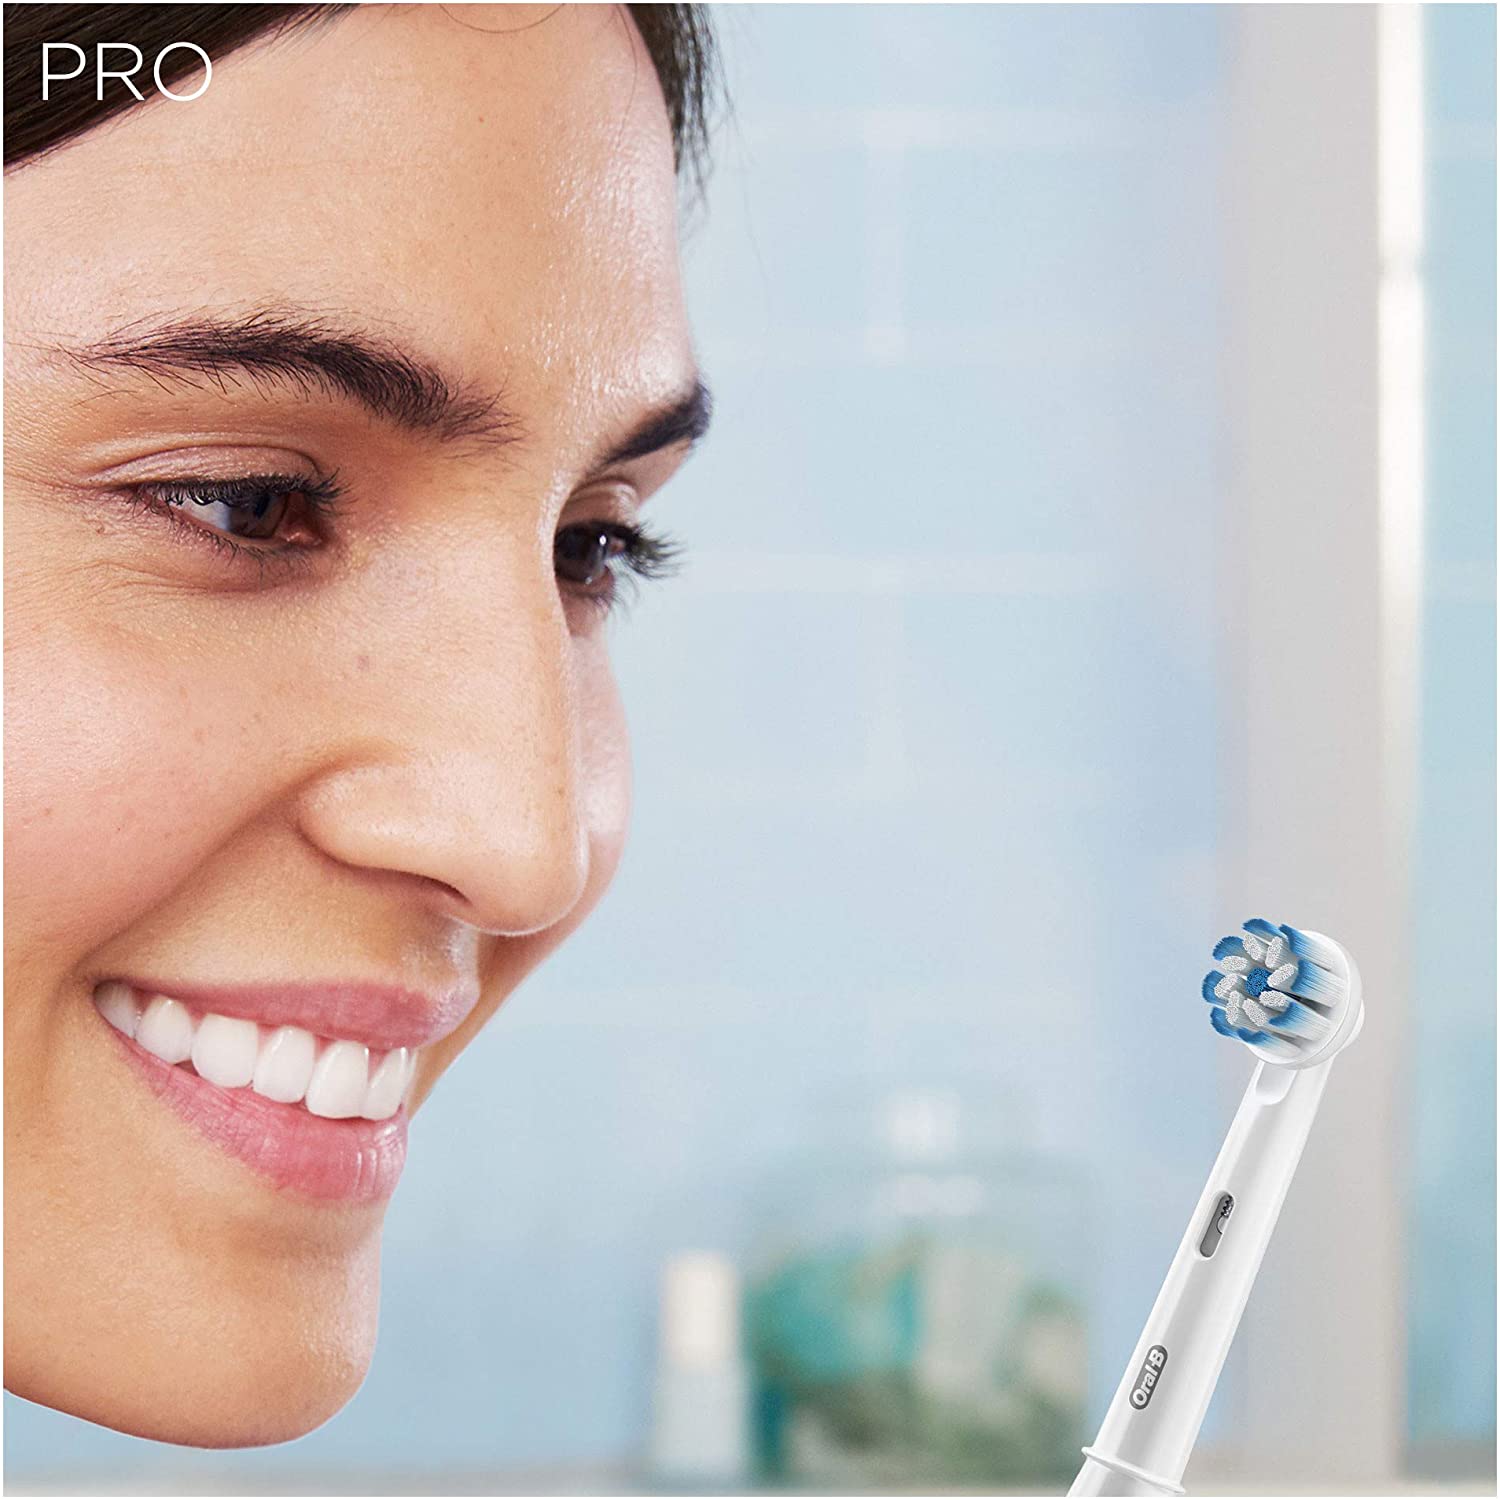 Oral-B Pro 1 - 650 - Turquoise Electric Toothbrush, 1 Toothbrush Head, 1 Bonus Sensitivity & Gum Calm Toothpaste - Healthxpress.ie